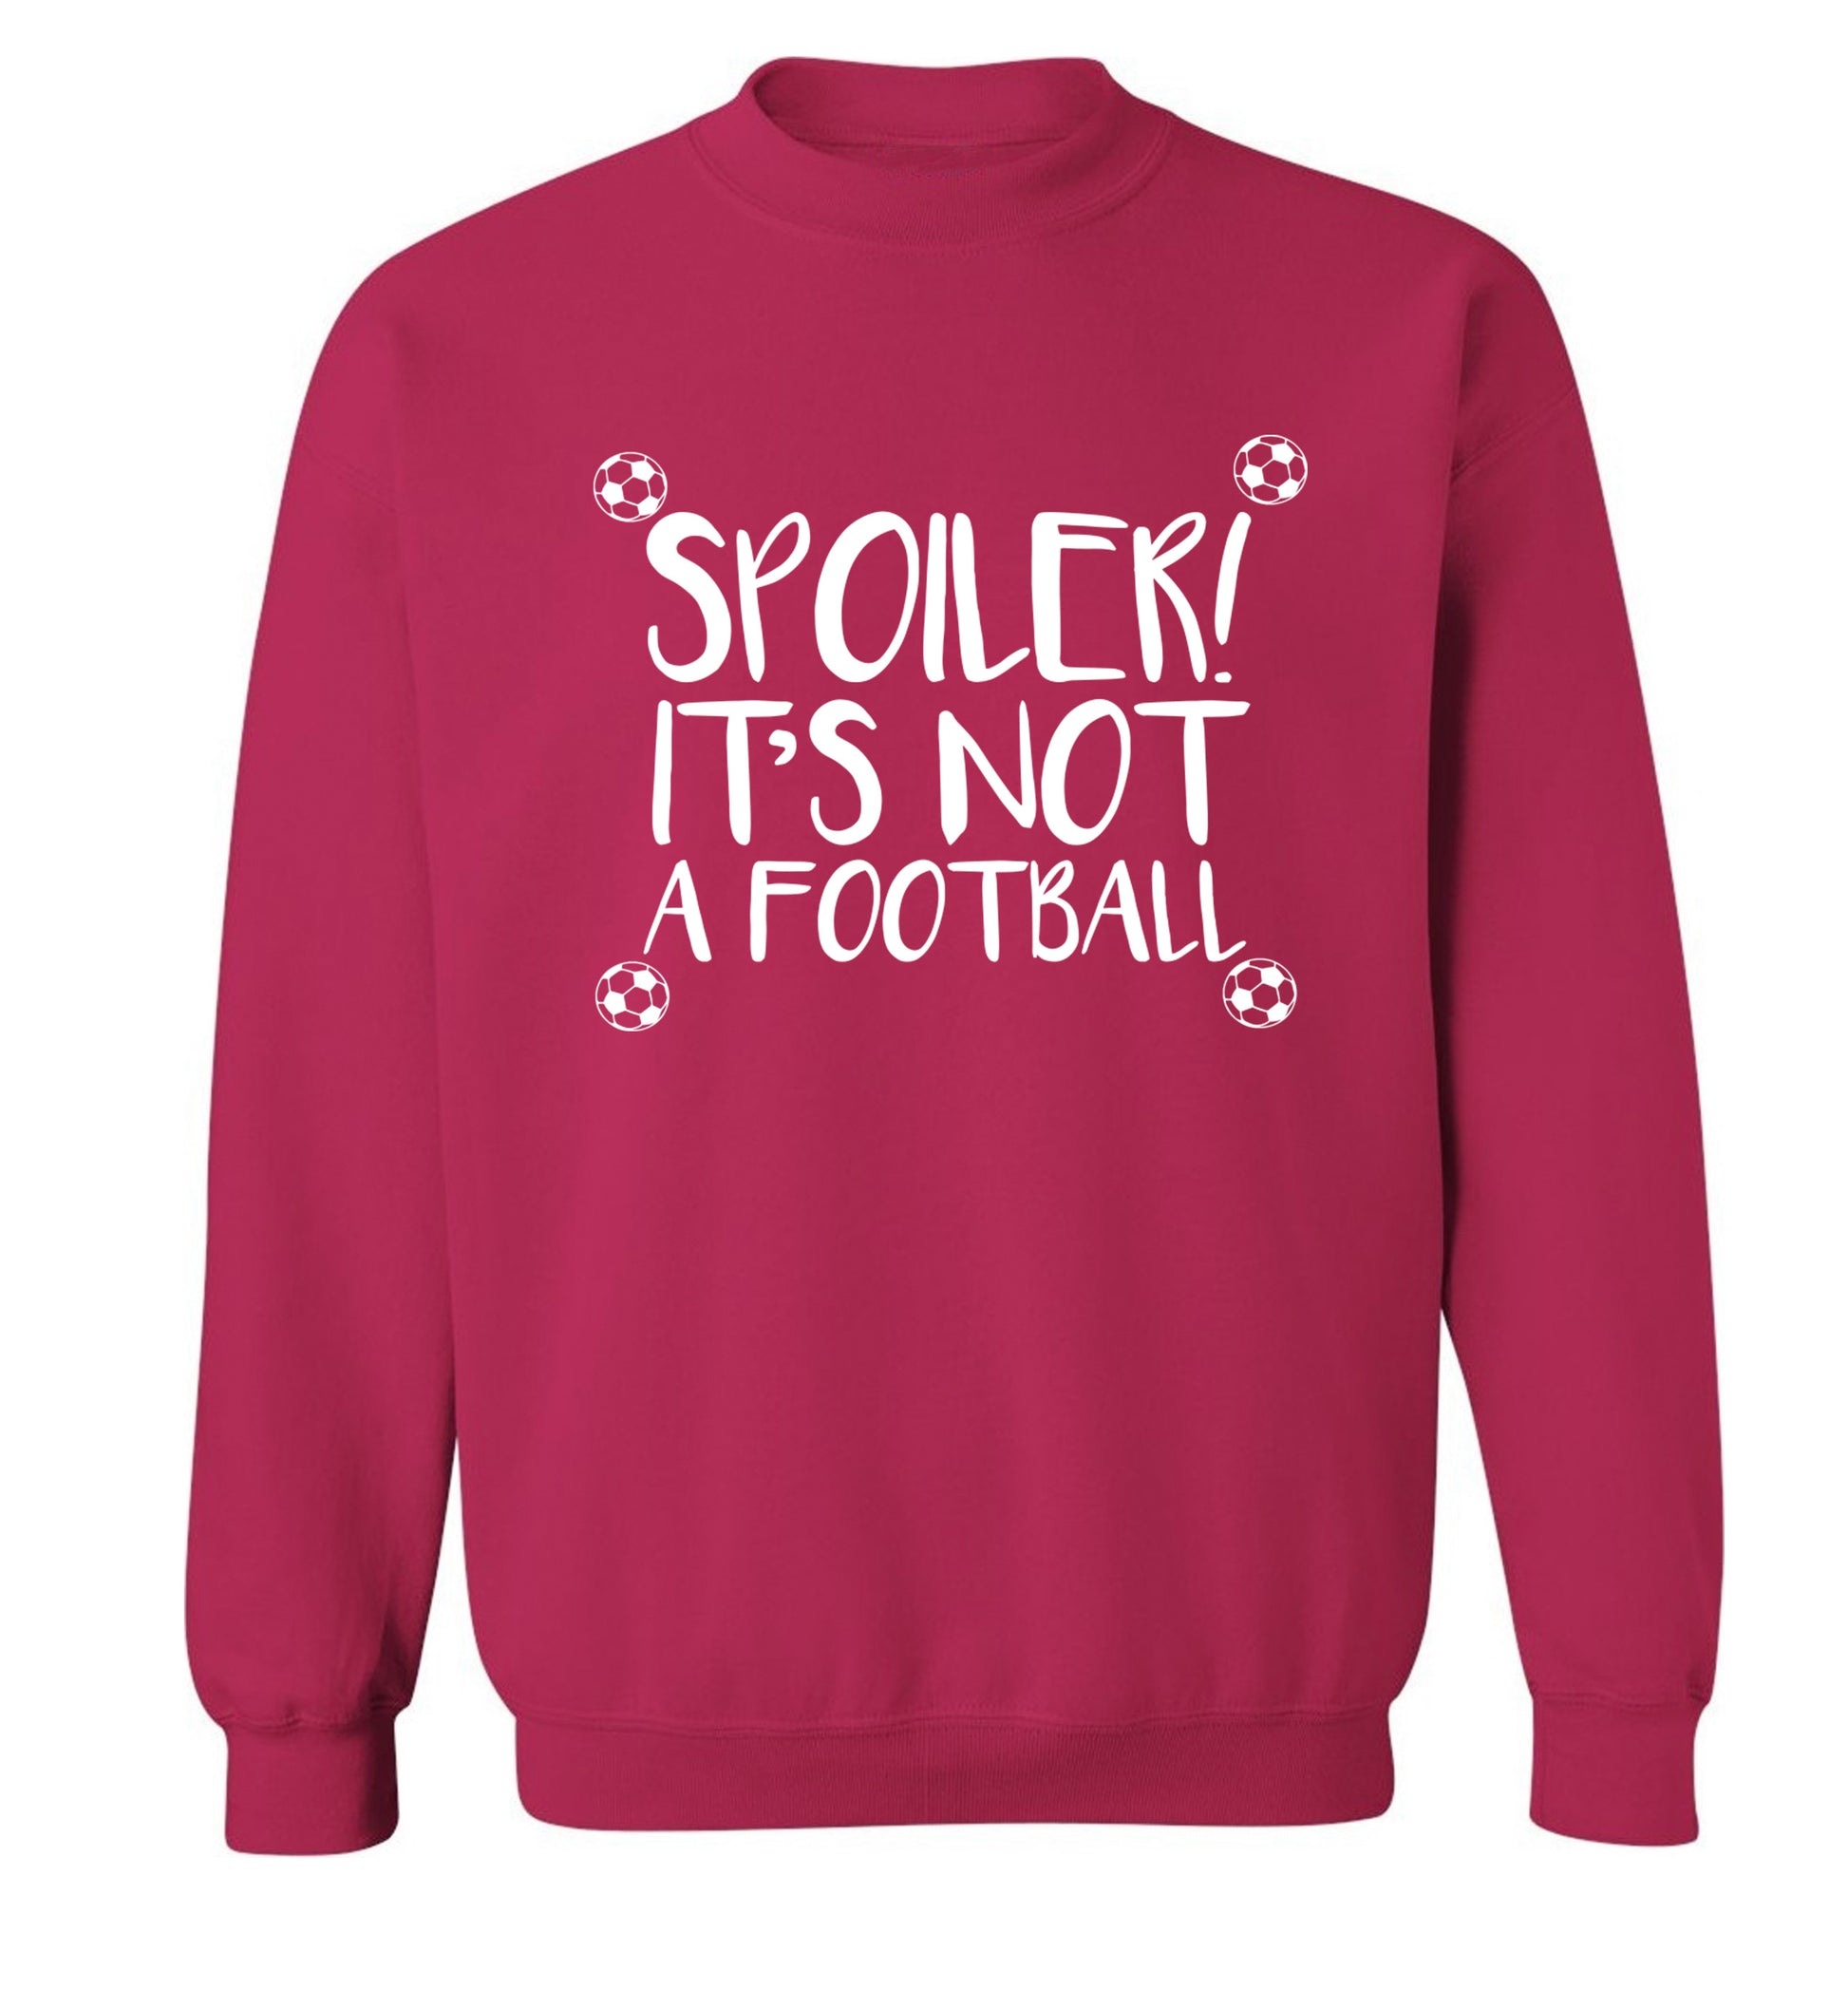 Spoiler it's not a football Adult's unisex pink Sweater 2XL